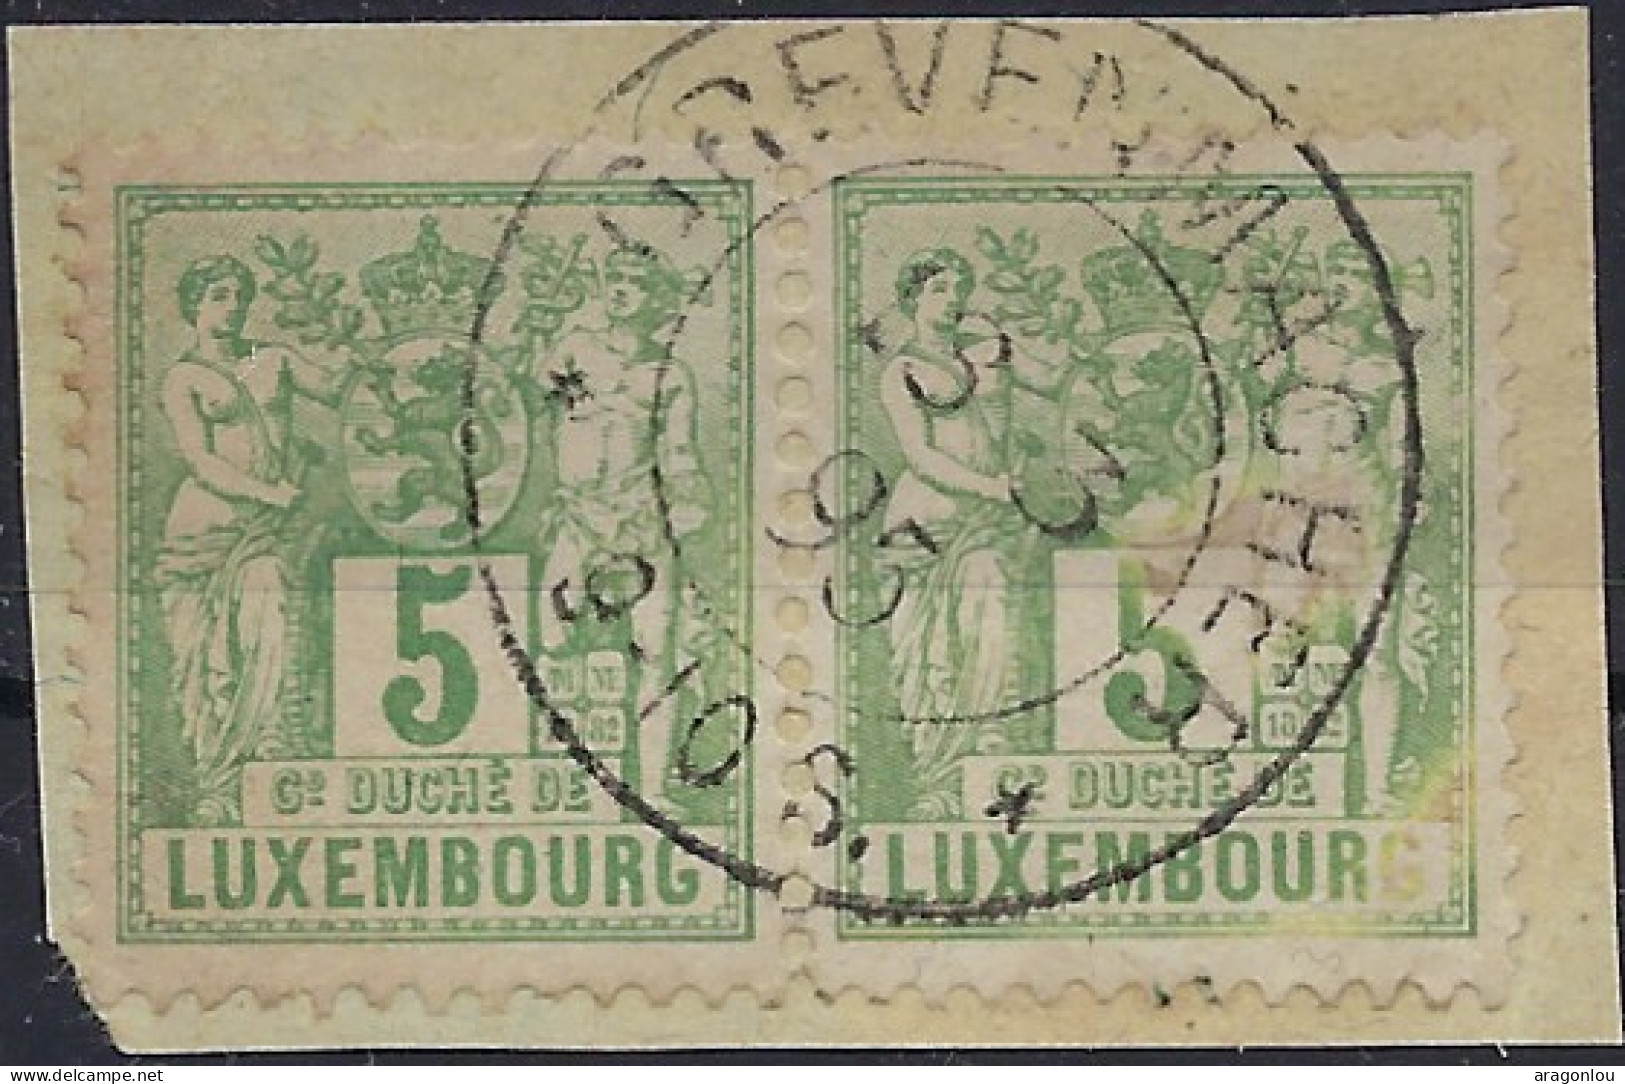 Luxembourg - Luxemburg - Timbres - Taxes  -  Timbres Paire   Cachet Sur Papier - Taxes